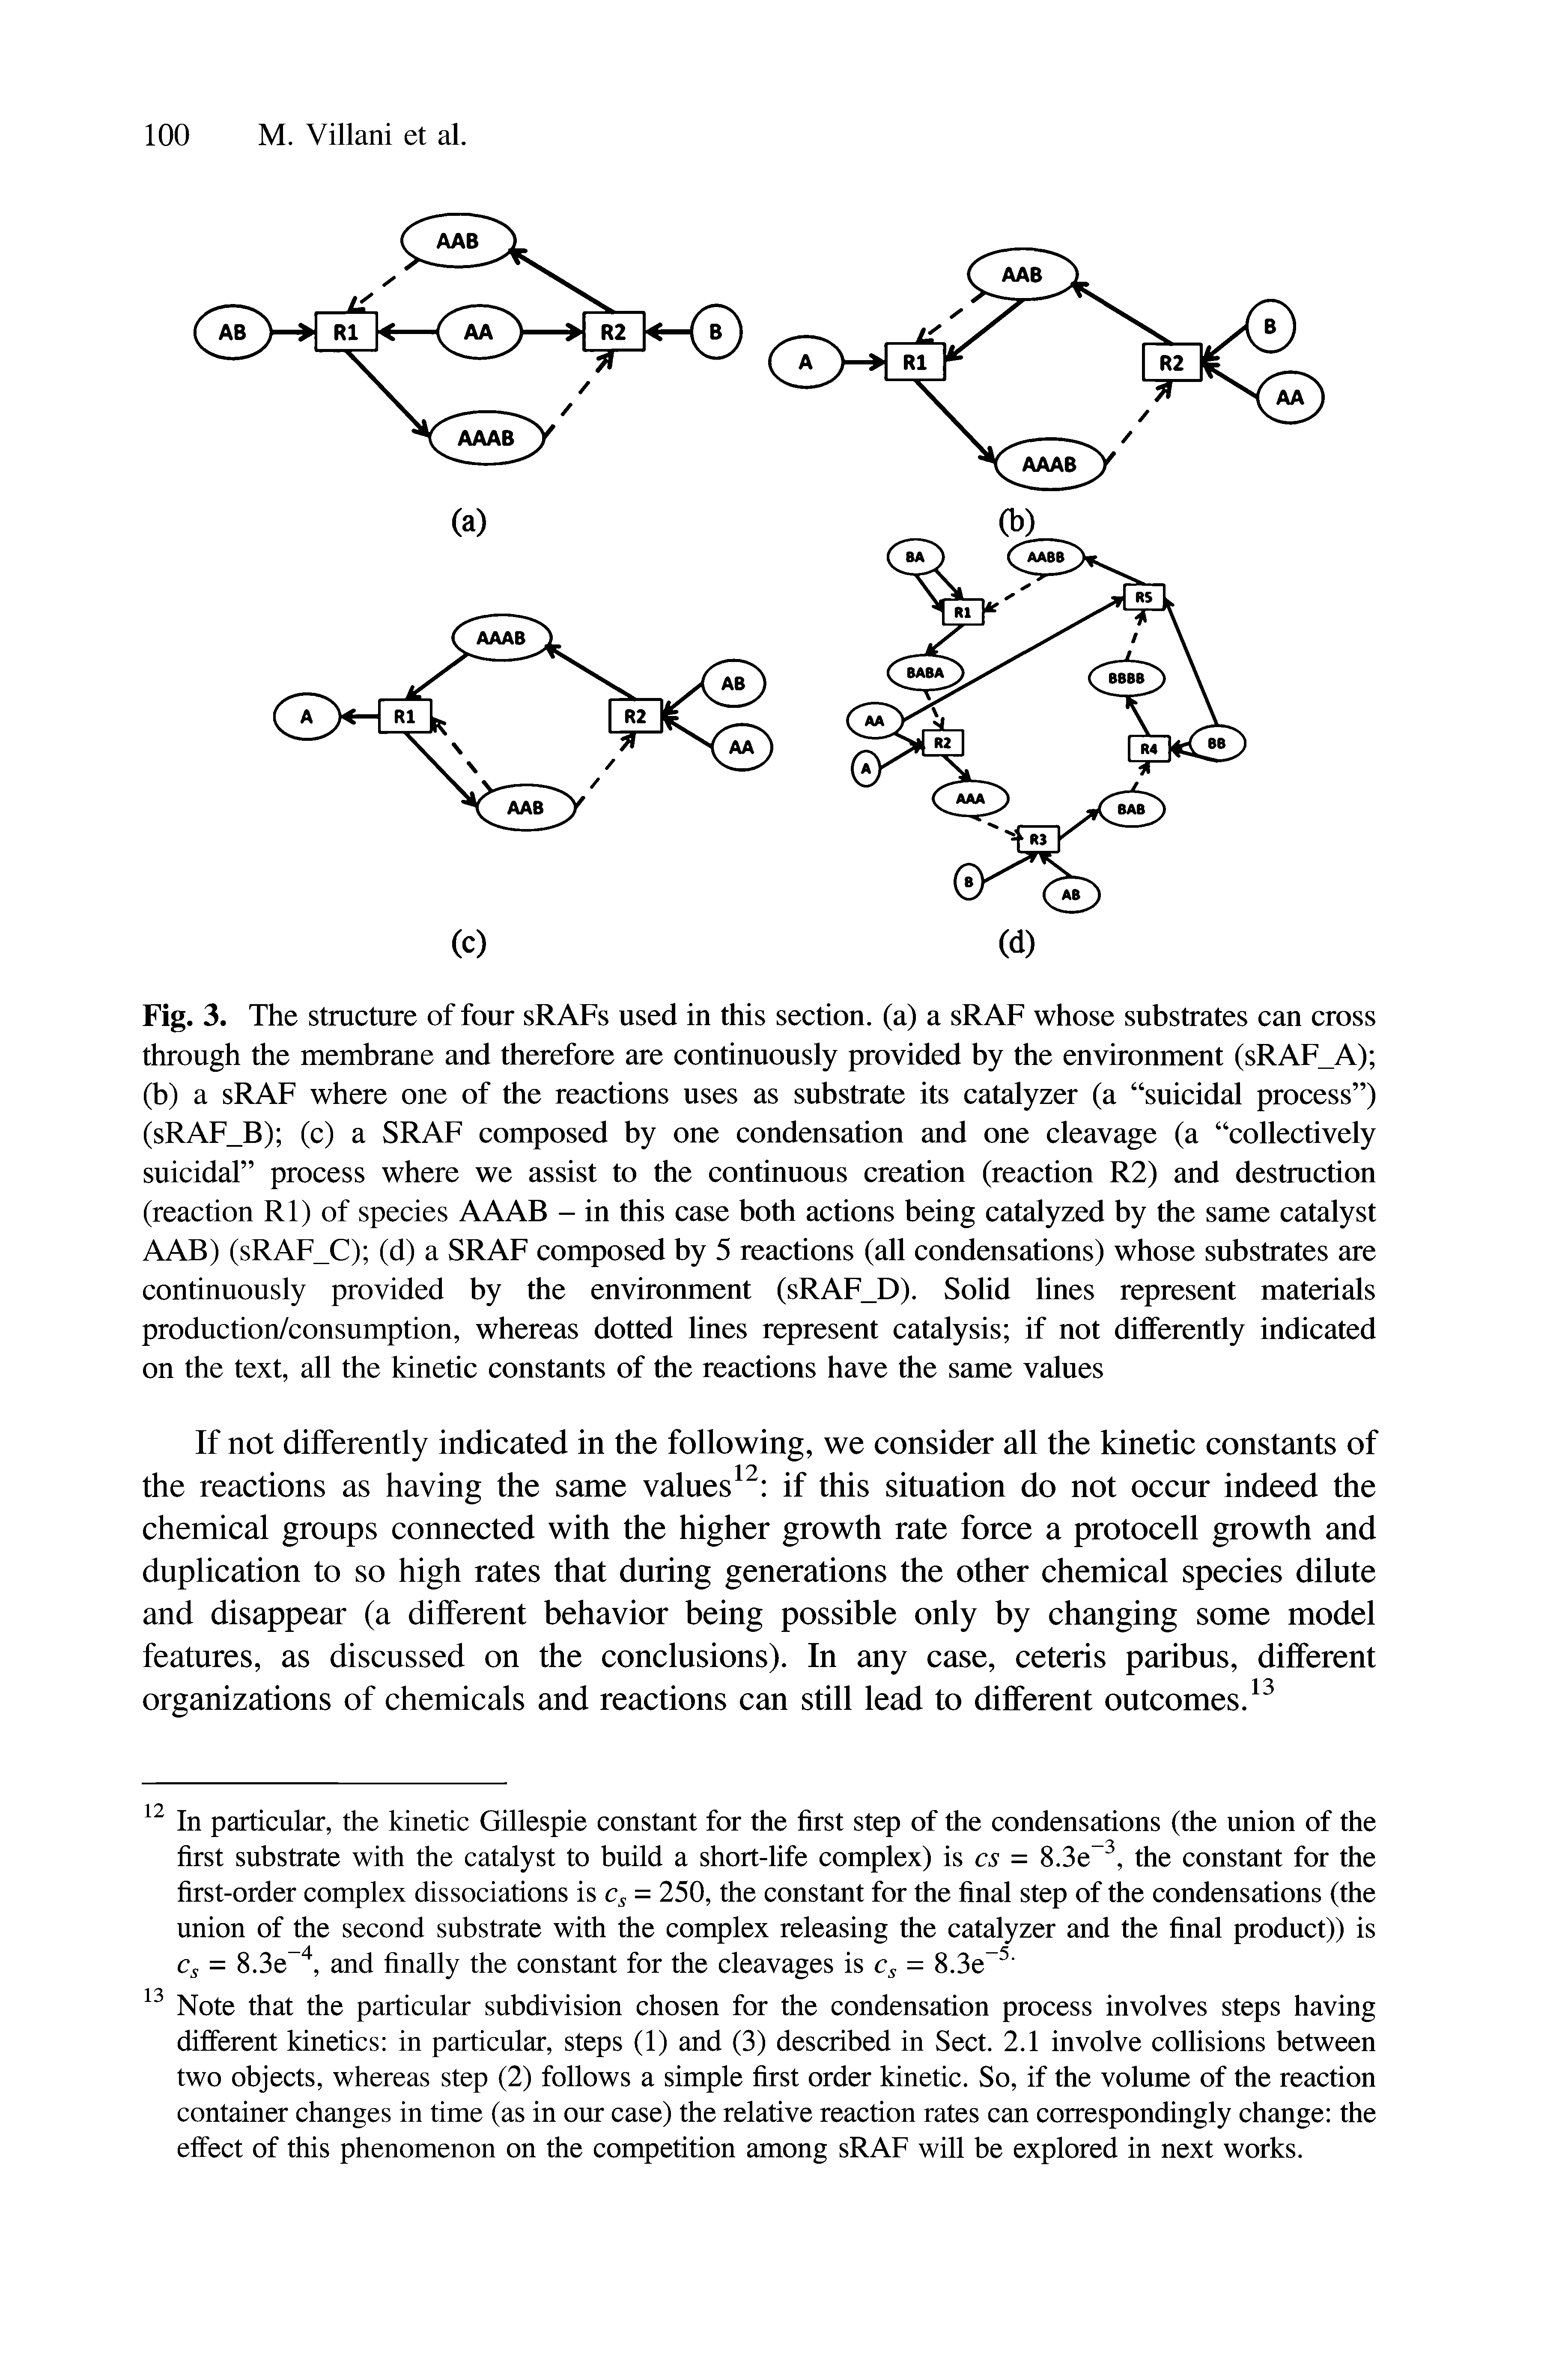 Fig. 3. The structure of four sRAFs used in this section, (a) a sRAF whose substrates can cross through the membrane and therefore are continuously provided by the environment (sRAF A) (b) a sRAF where one of the reactions uses as substrate its catalyzer (a suicidal process ) (sRAF B) (c) a SRAF composed by one condensation and one cleavage (a collectively suicidal process where we assist to the continuous creation (reaction R2) and destruction (reaction Rl) of species AAAB - in this case both actions being catalyzed by the same catalyst AAB) (sRAF C) (d) a SRAF composed by 5 reactions (all condensations) whose substrates are continuously provided by the environment (sRAF D). Solid lines represent materials production/consumption, whereas dotted lines represent catalysis if not differently indicated on the text, all the kinetic constants of the reactions have the same values...